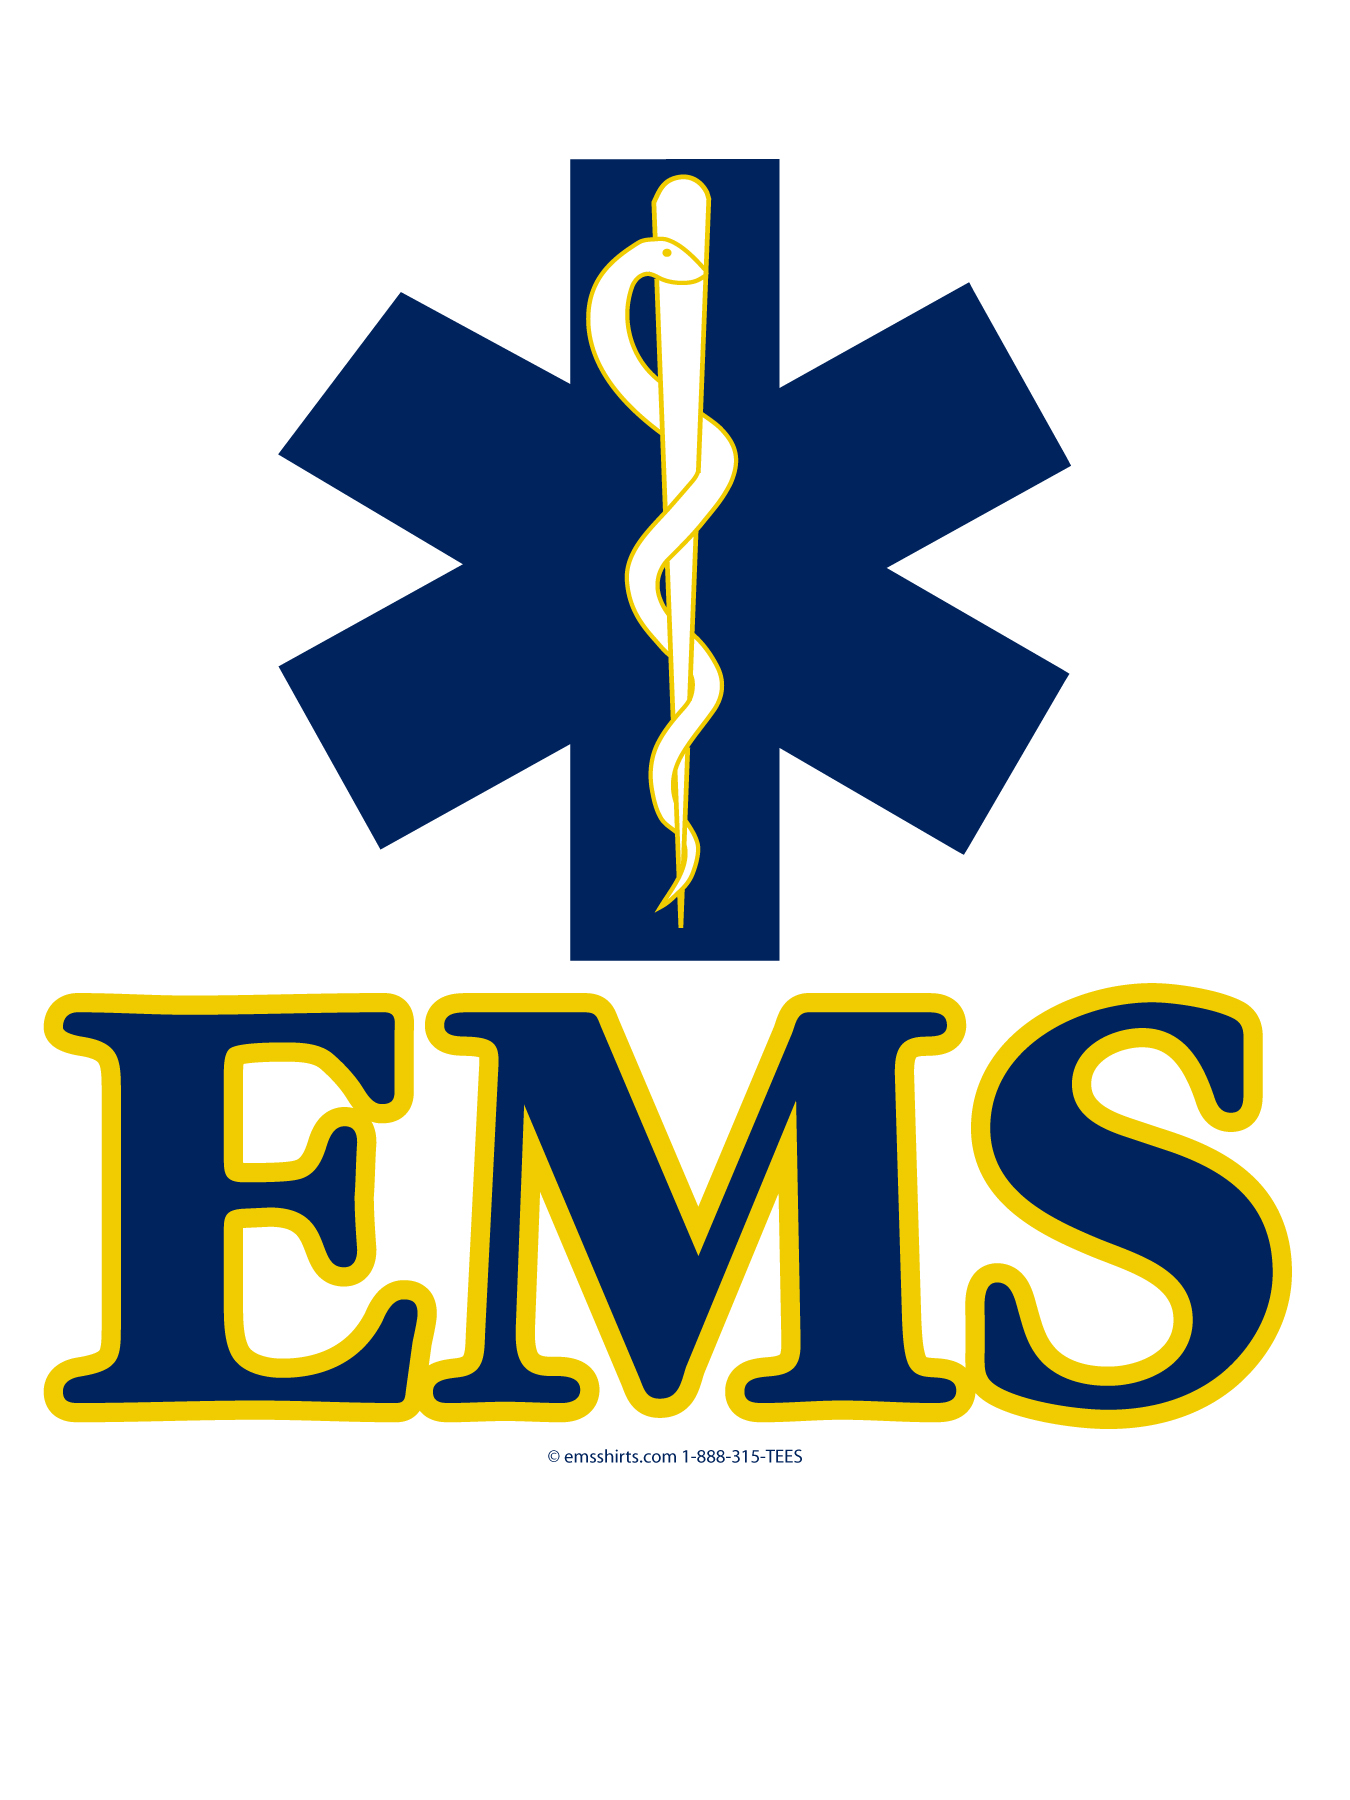 Free EMS Cliparts, Download Free Clip Art, Free Clip Art on.